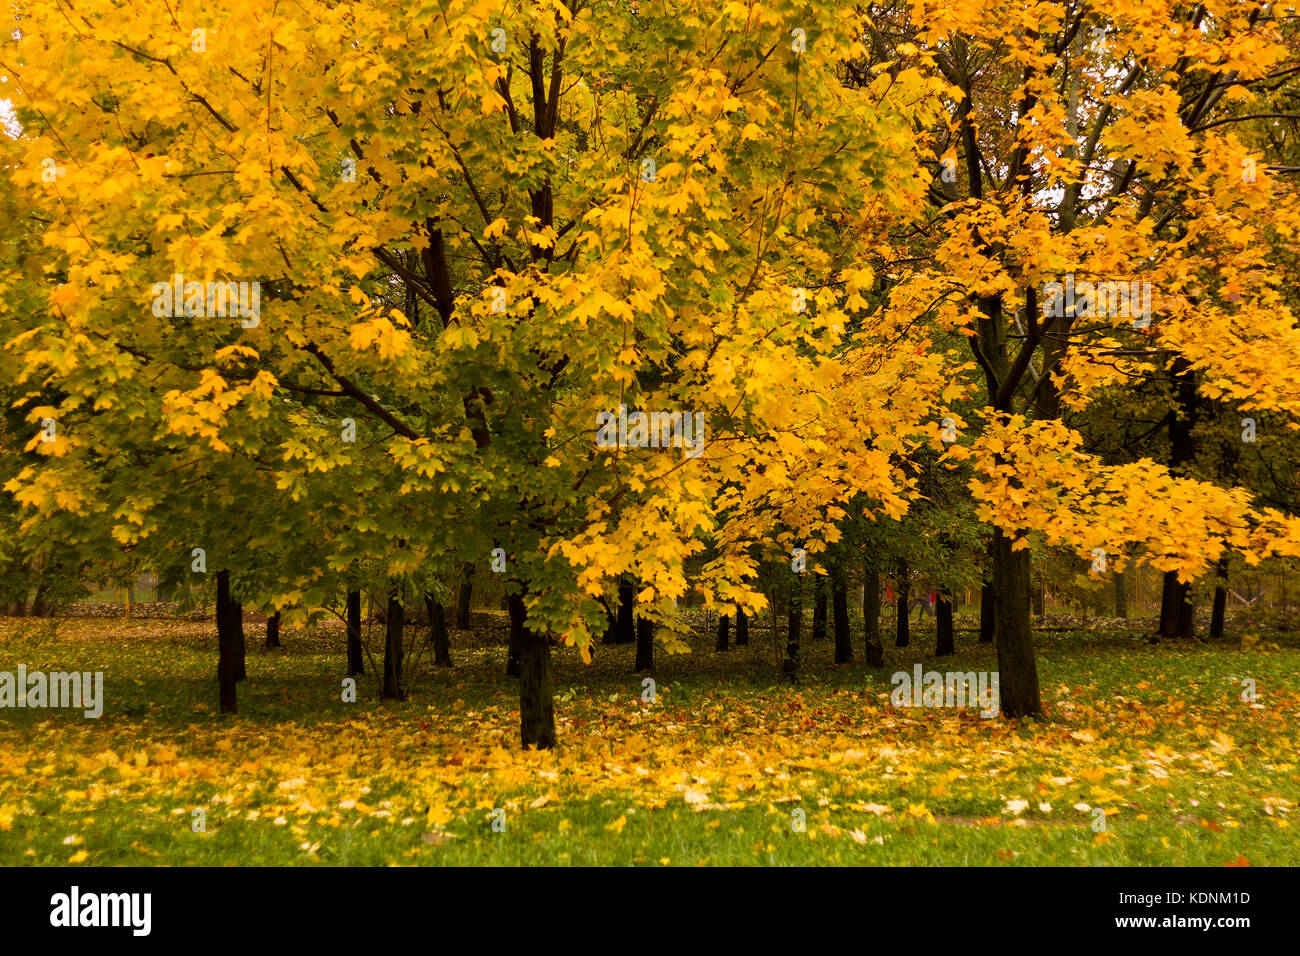 Maple trees in a park by an autumn day with yellow leaves and grass around covered by foliage. Stock Photo